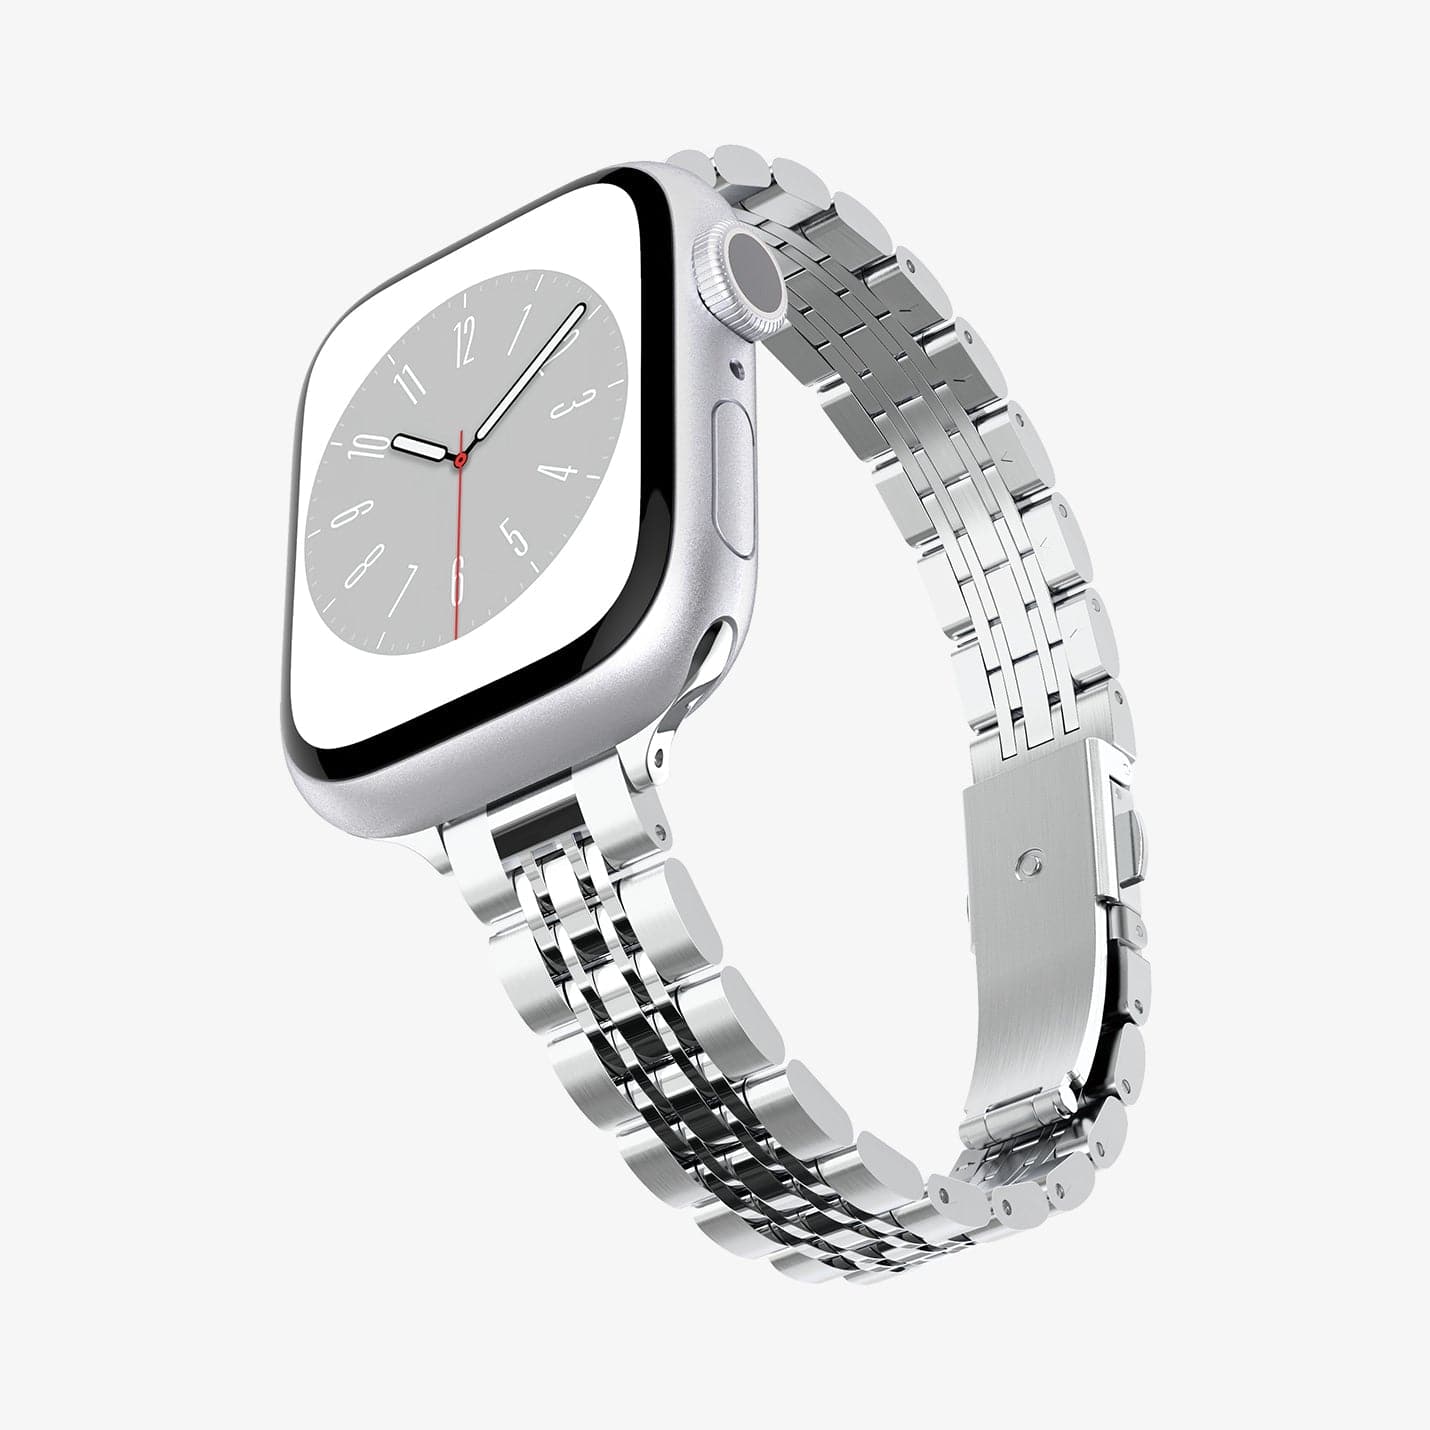 AMP06920 - Apple Watch Series Band Shine Fit in silver showing the front, side and bottom